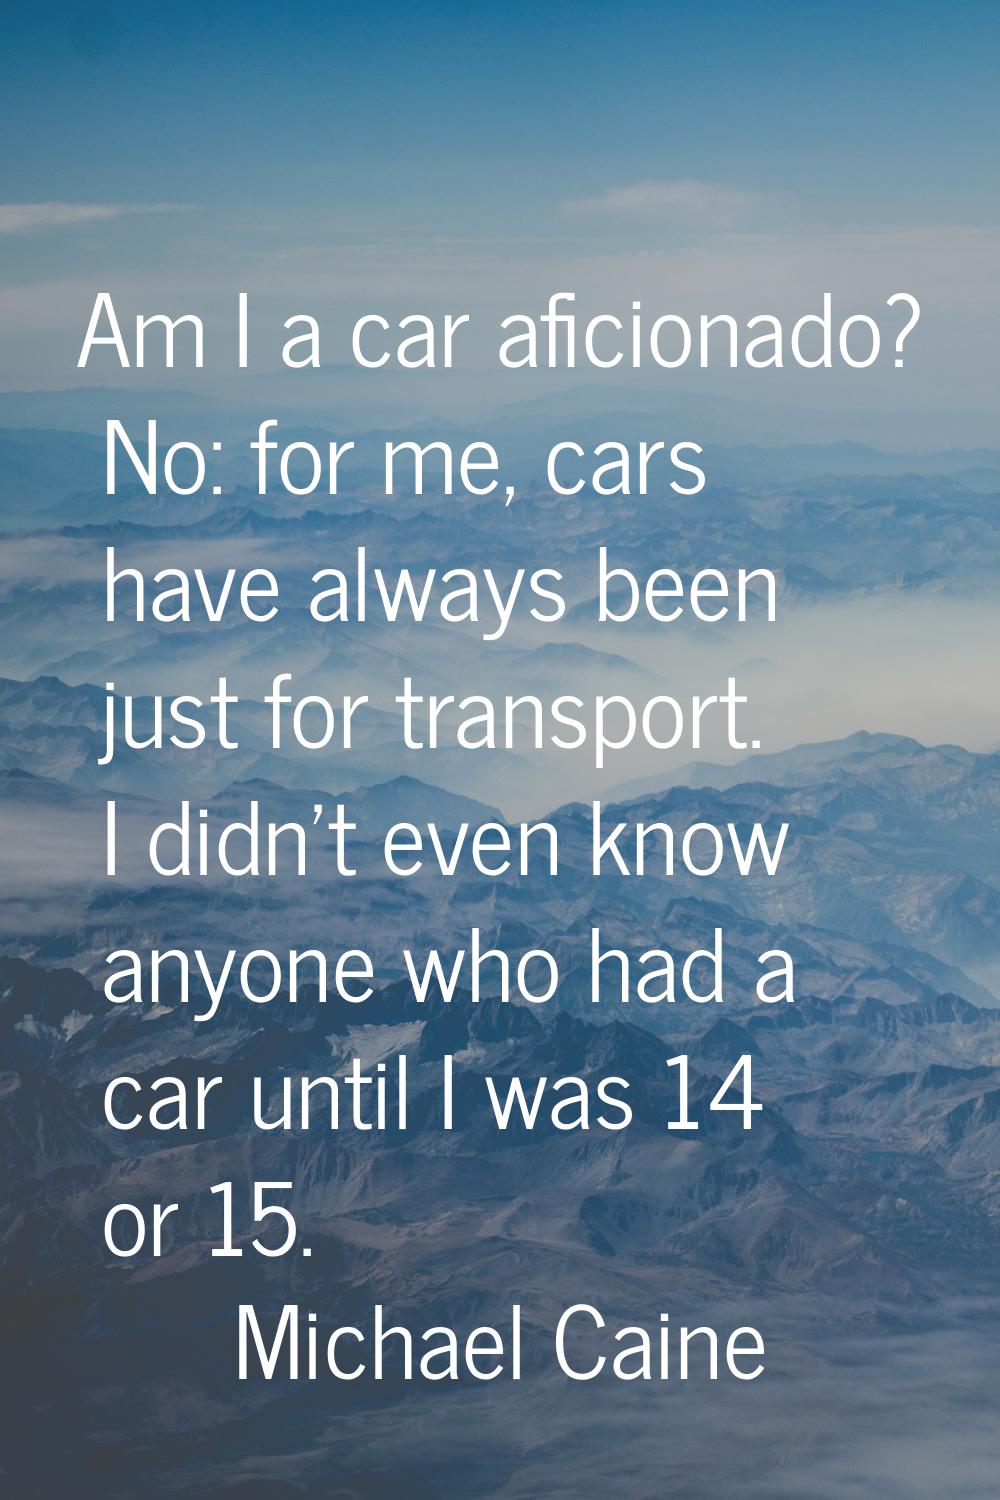 Am I a car aficionado? No: for me, cars have always been just for transport. I didn't even know any